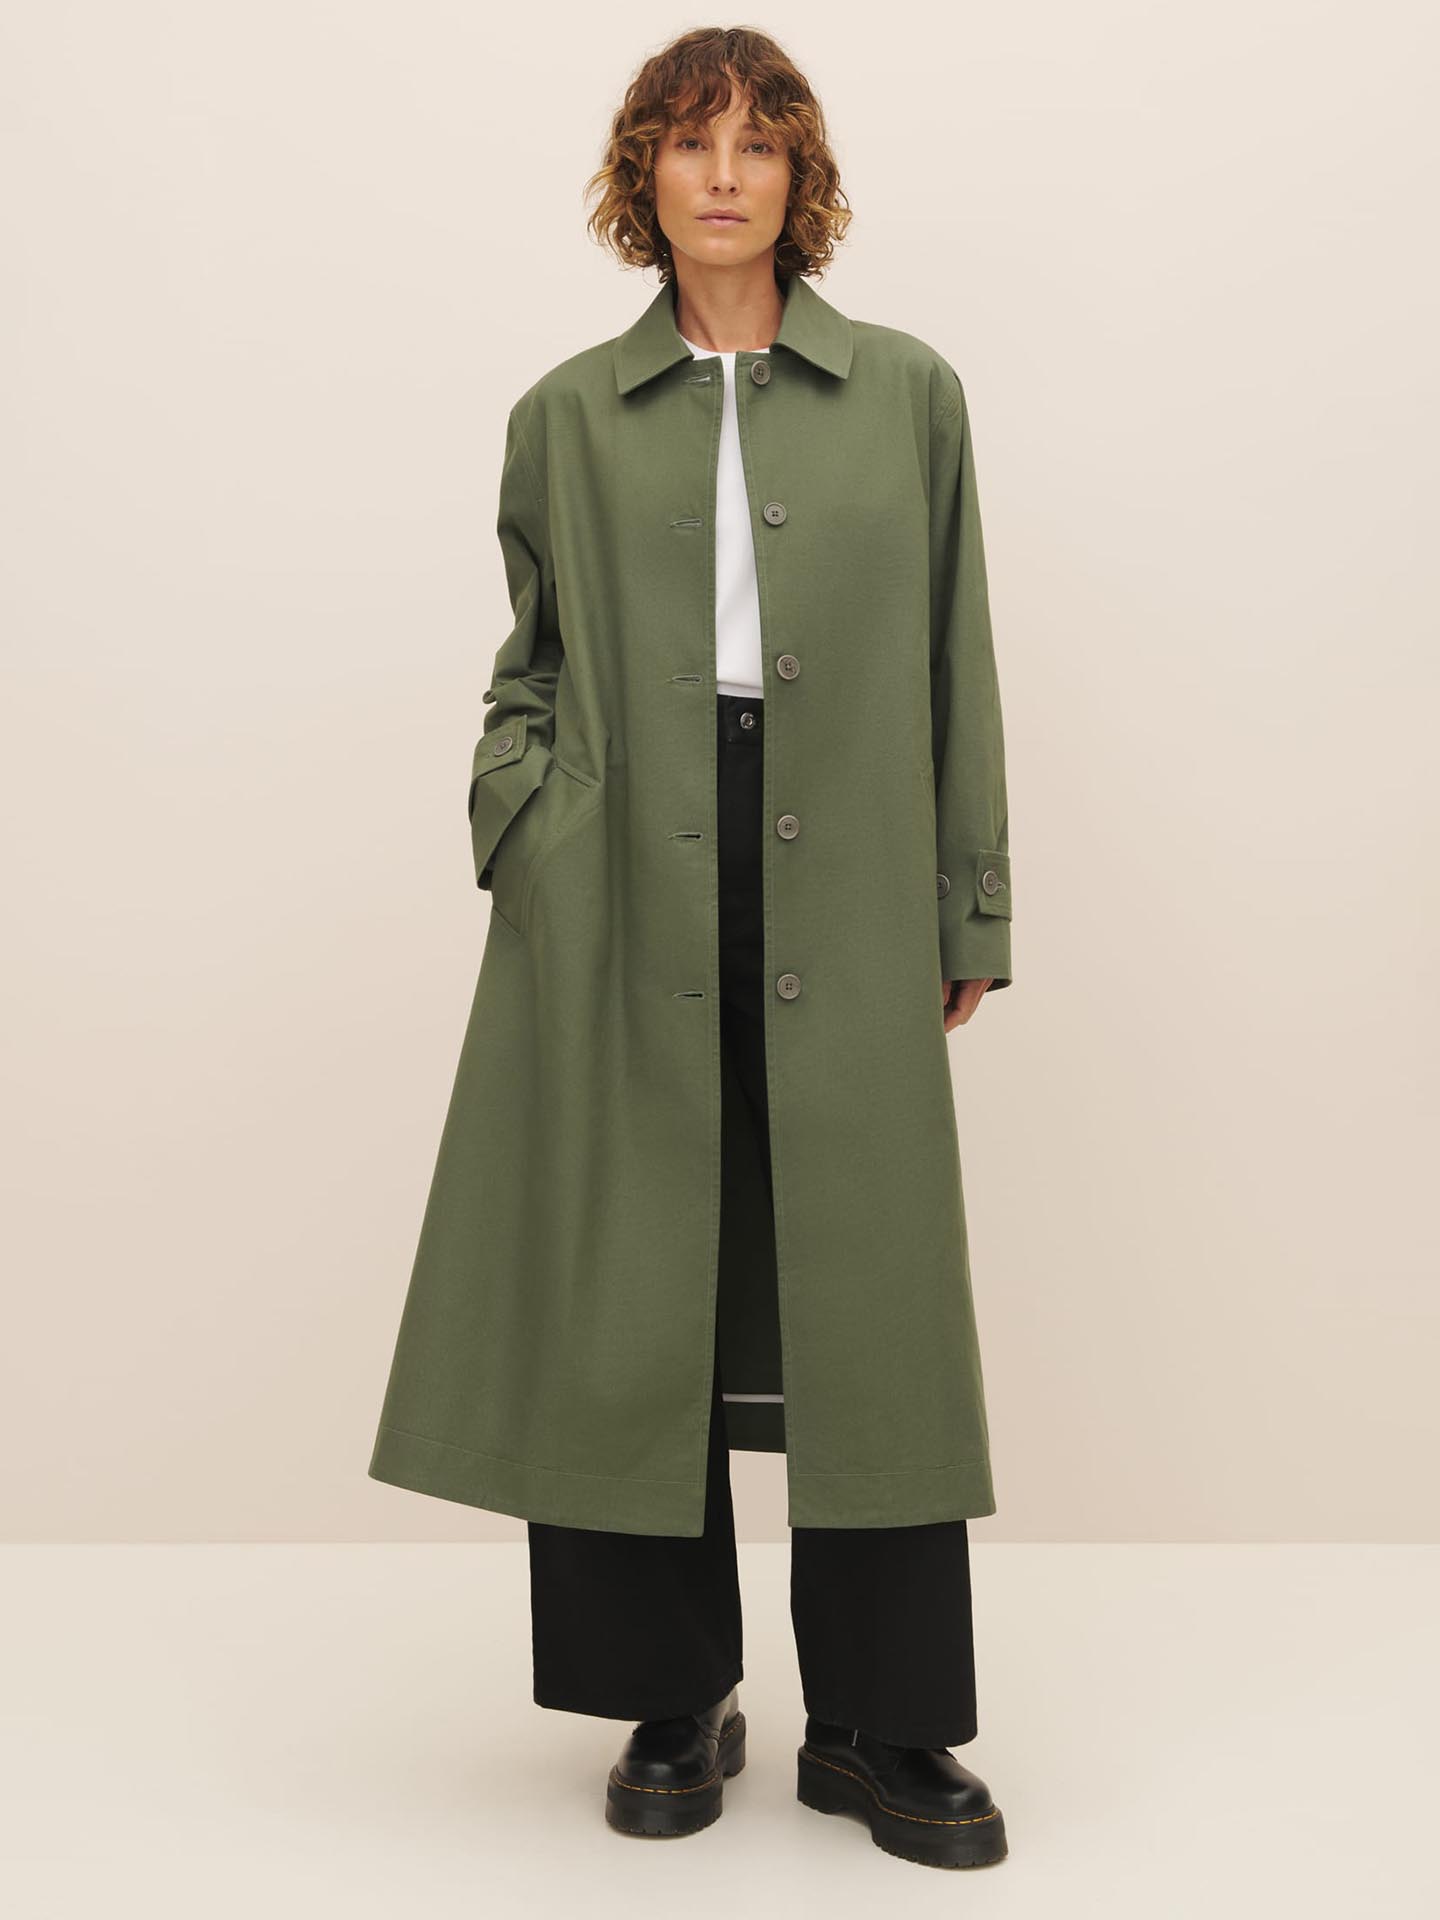 Sentence with replacement: A person wearing a Kowtow Cleo Trench Coat in Sage, black pants, and black shoes against a neutral background.